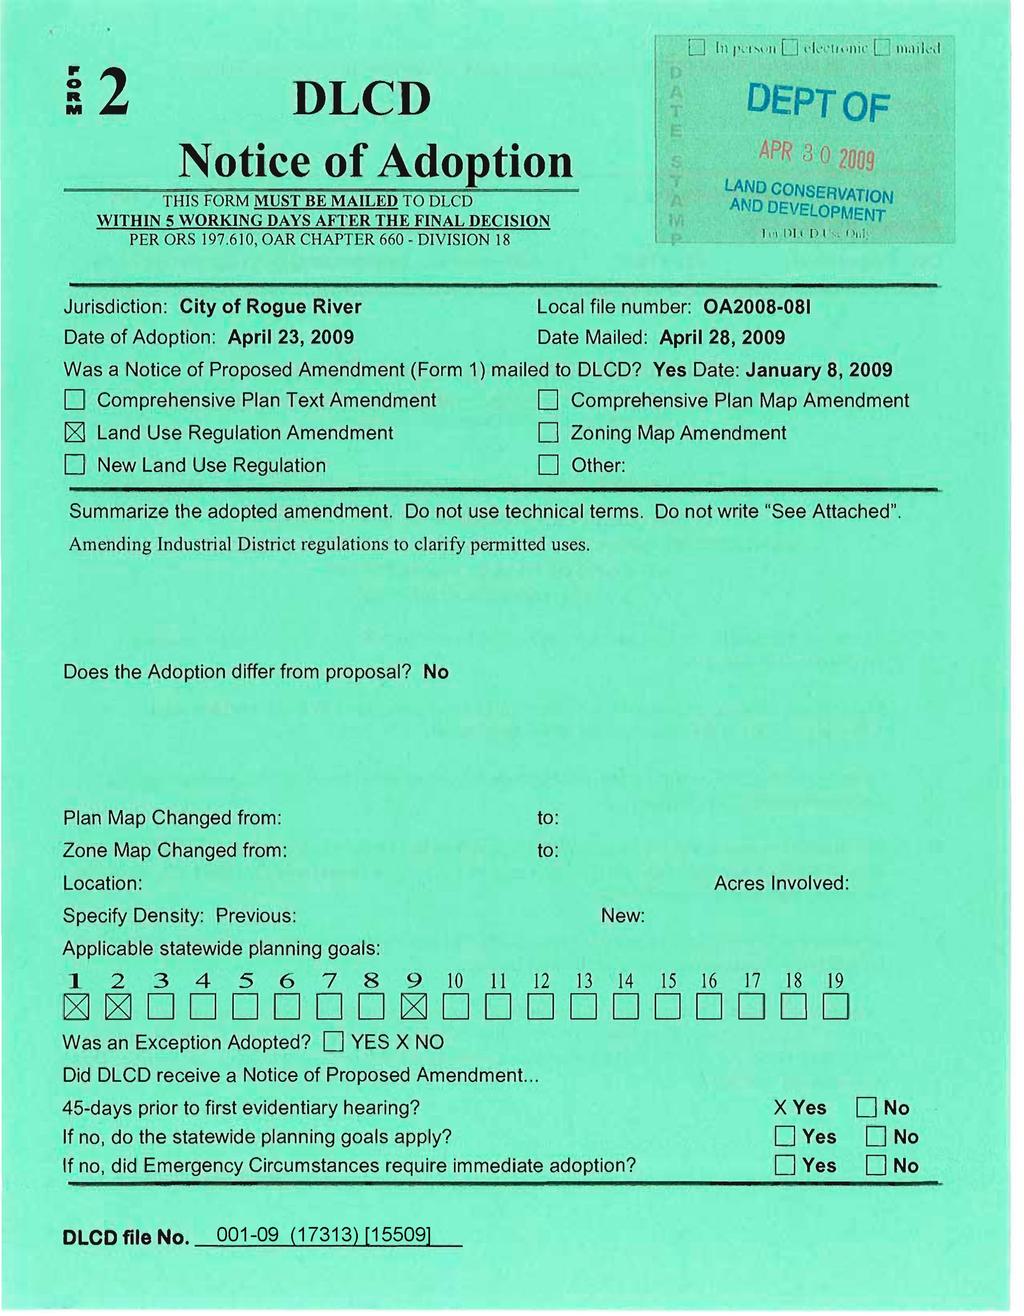 S 2 DLCD Notice of Adoption THIS FORM MUST BE MAILED TO DLCD WITHIN 5 WORKING DAYS AFTER THE FINAL DECISION PER ORS 197.610, OAR CHAPTER 660 - DIVISION 18 n U'im n LÜ flcvtu-iiie [2 m.